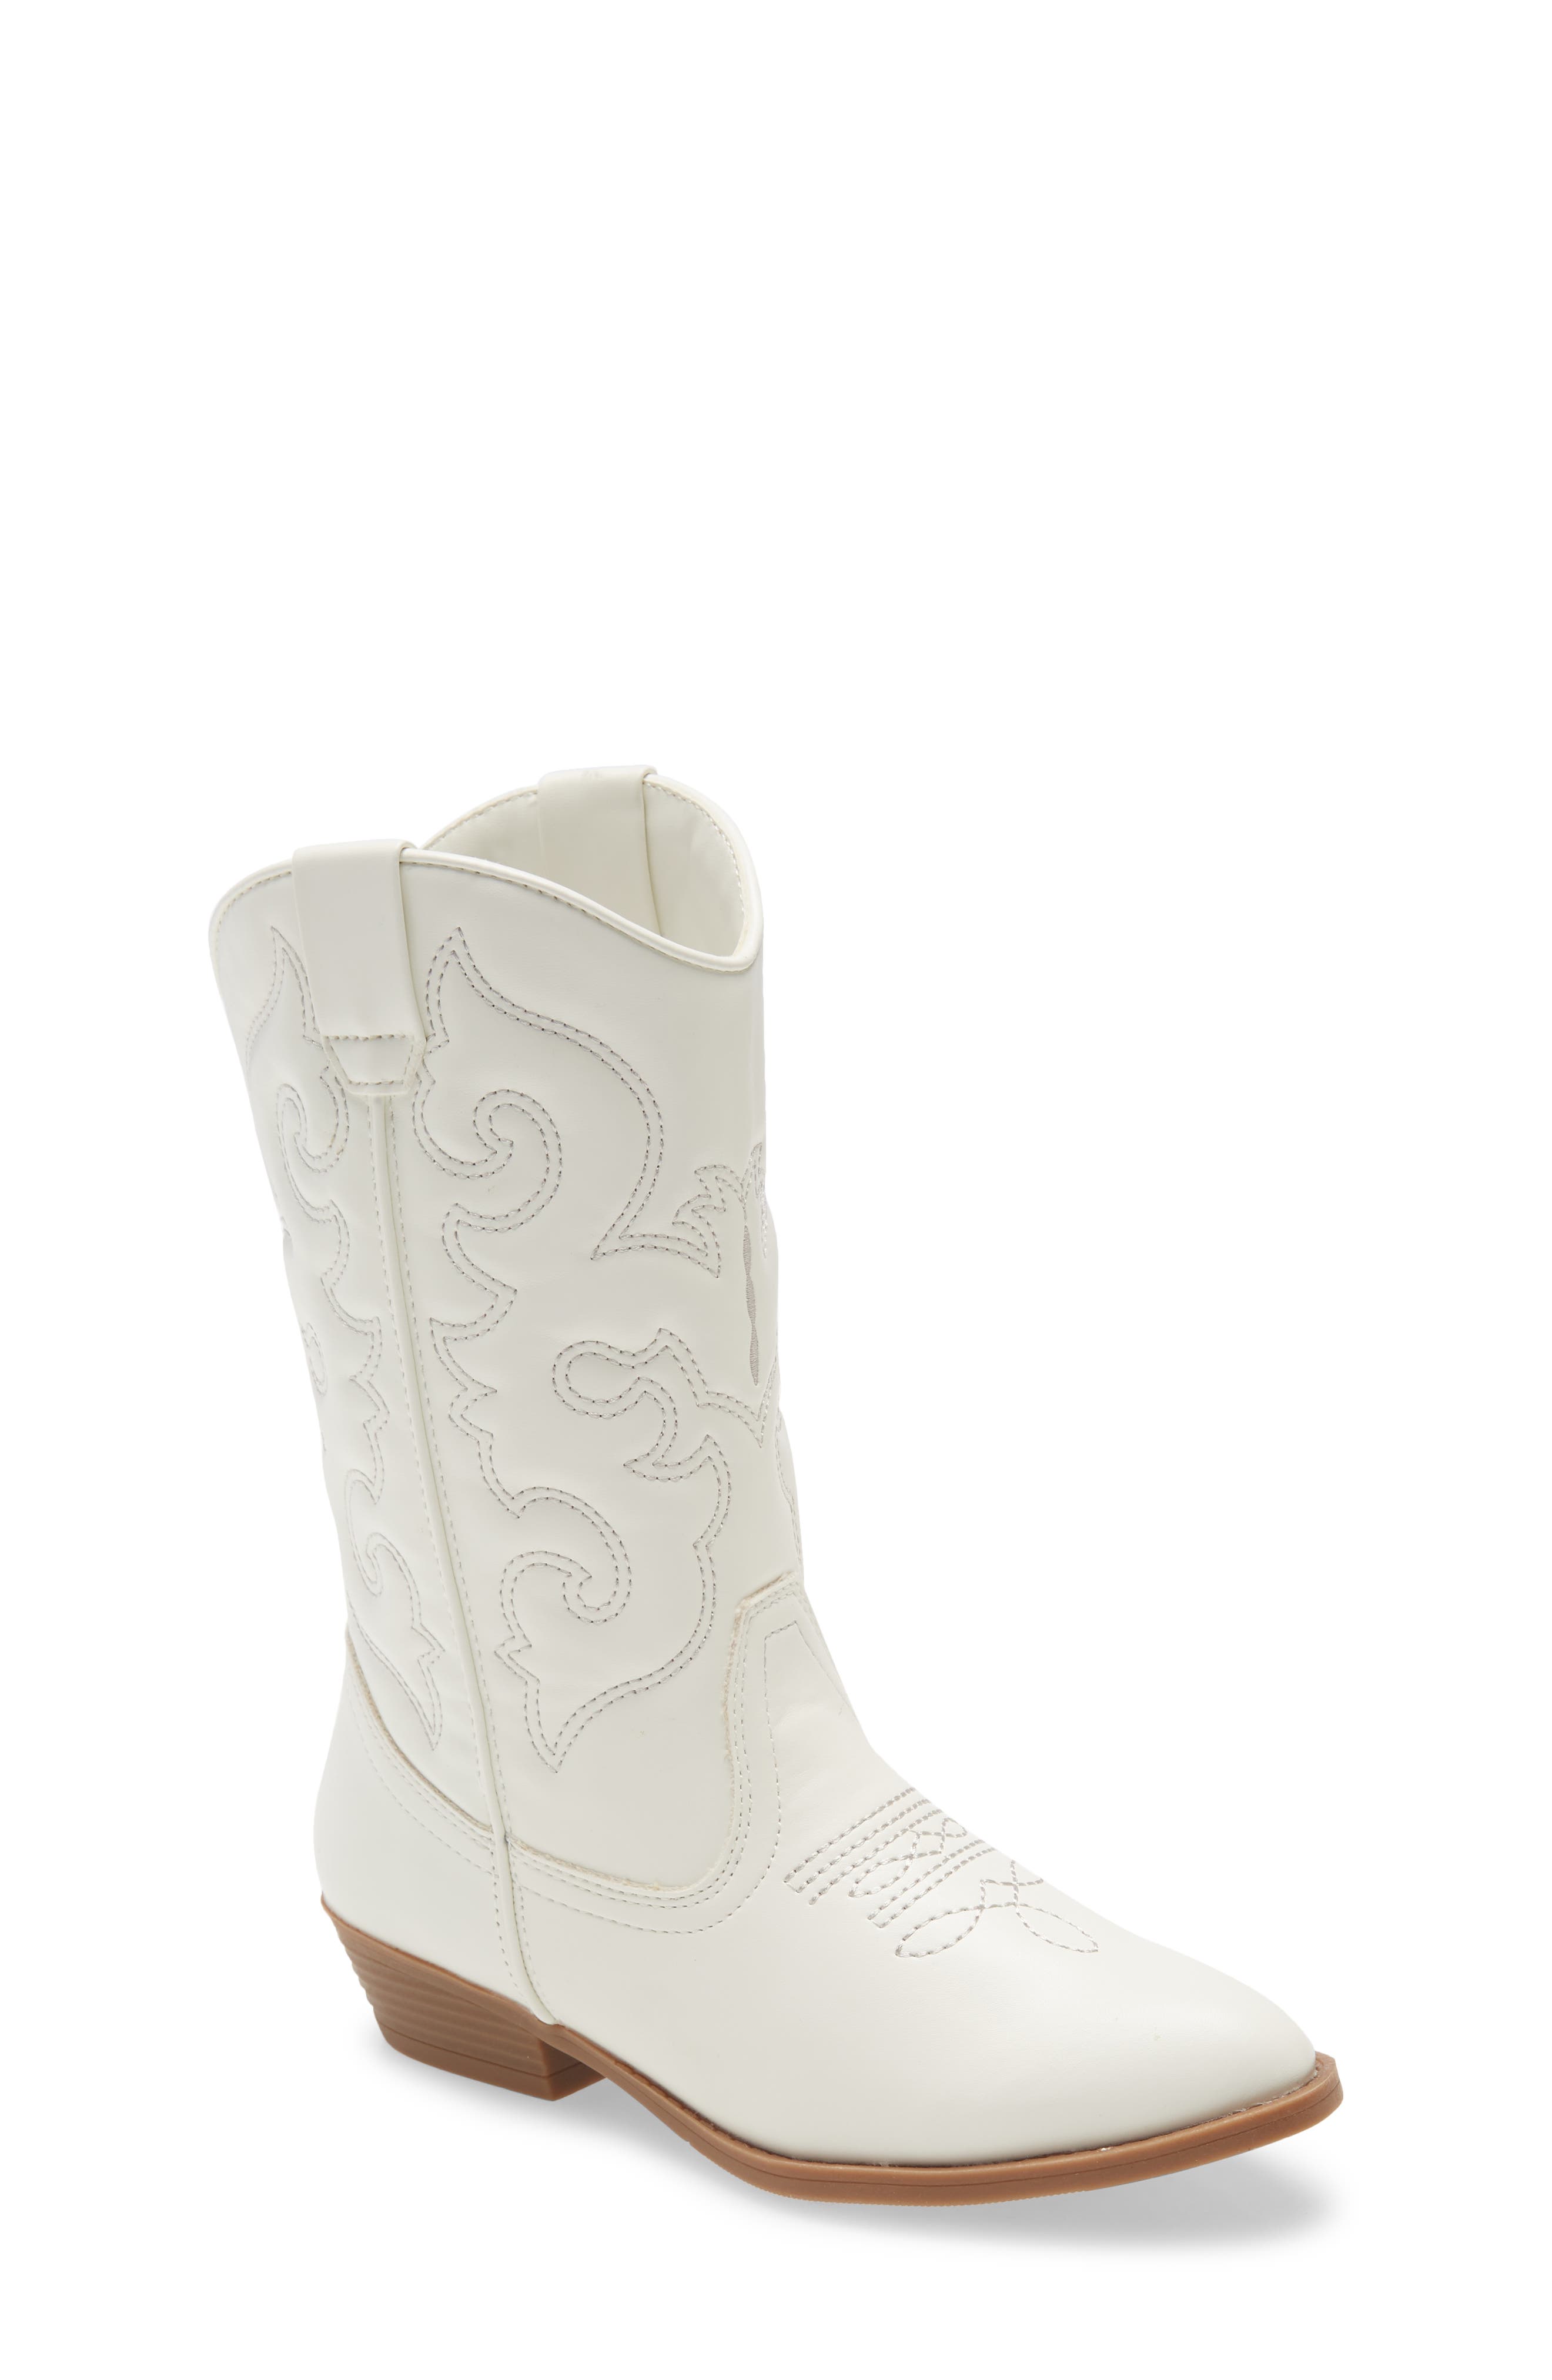 white cowboy boots for toddlers